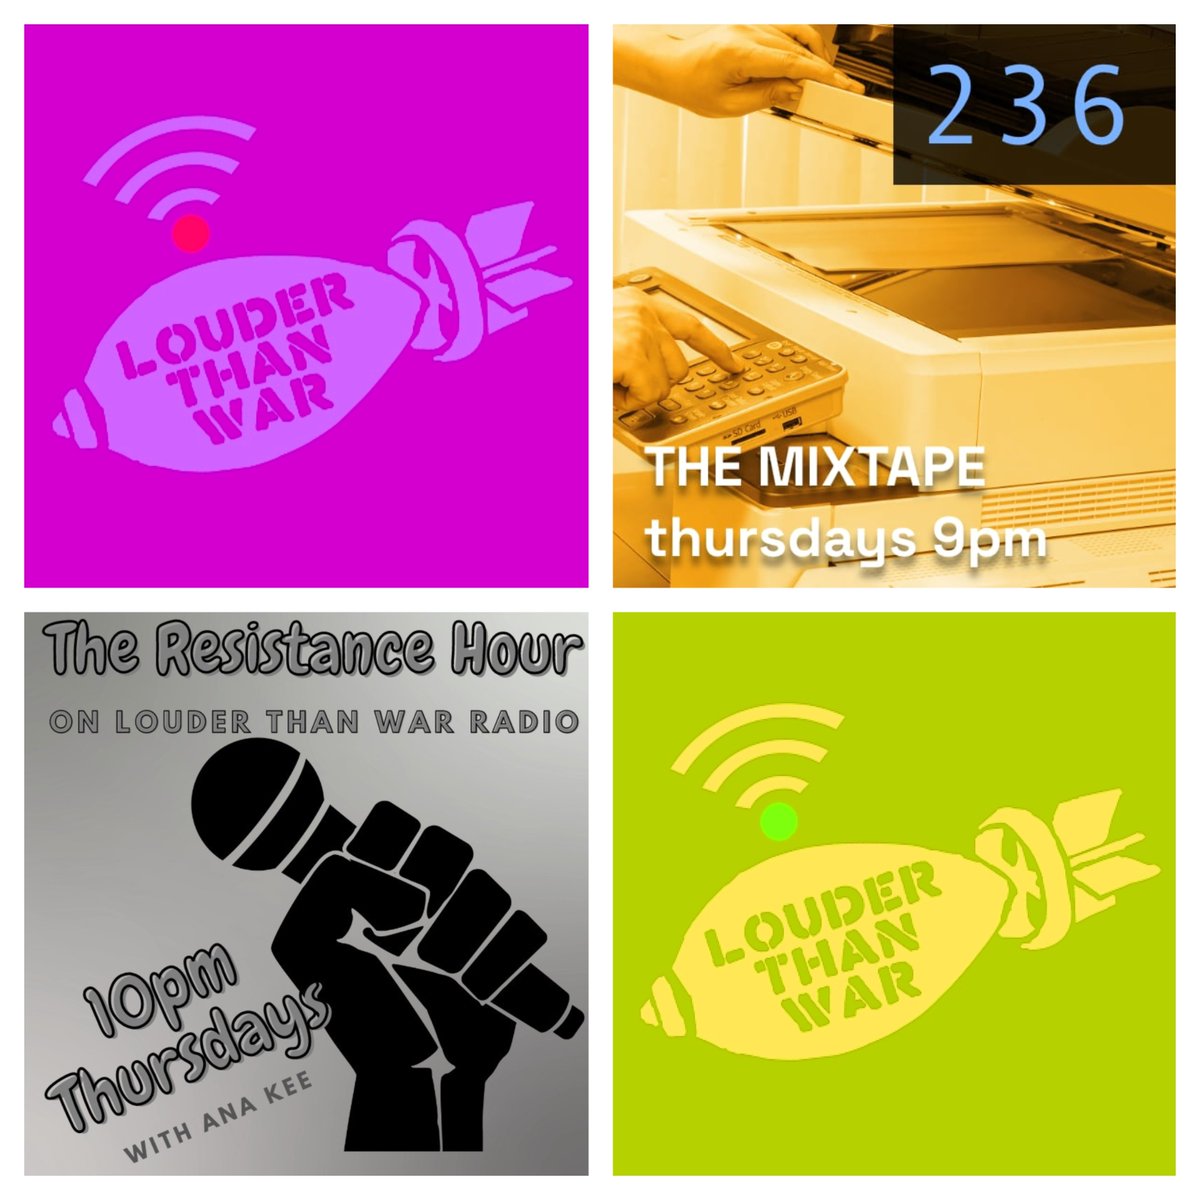 Tonight on Louder Than War Radio s2.radio.co/sab795a38d/lis… 9pm — The Mixtape with Julius C. Lacking @jclacking 10pm — The Resistance Hour with Ana Kee